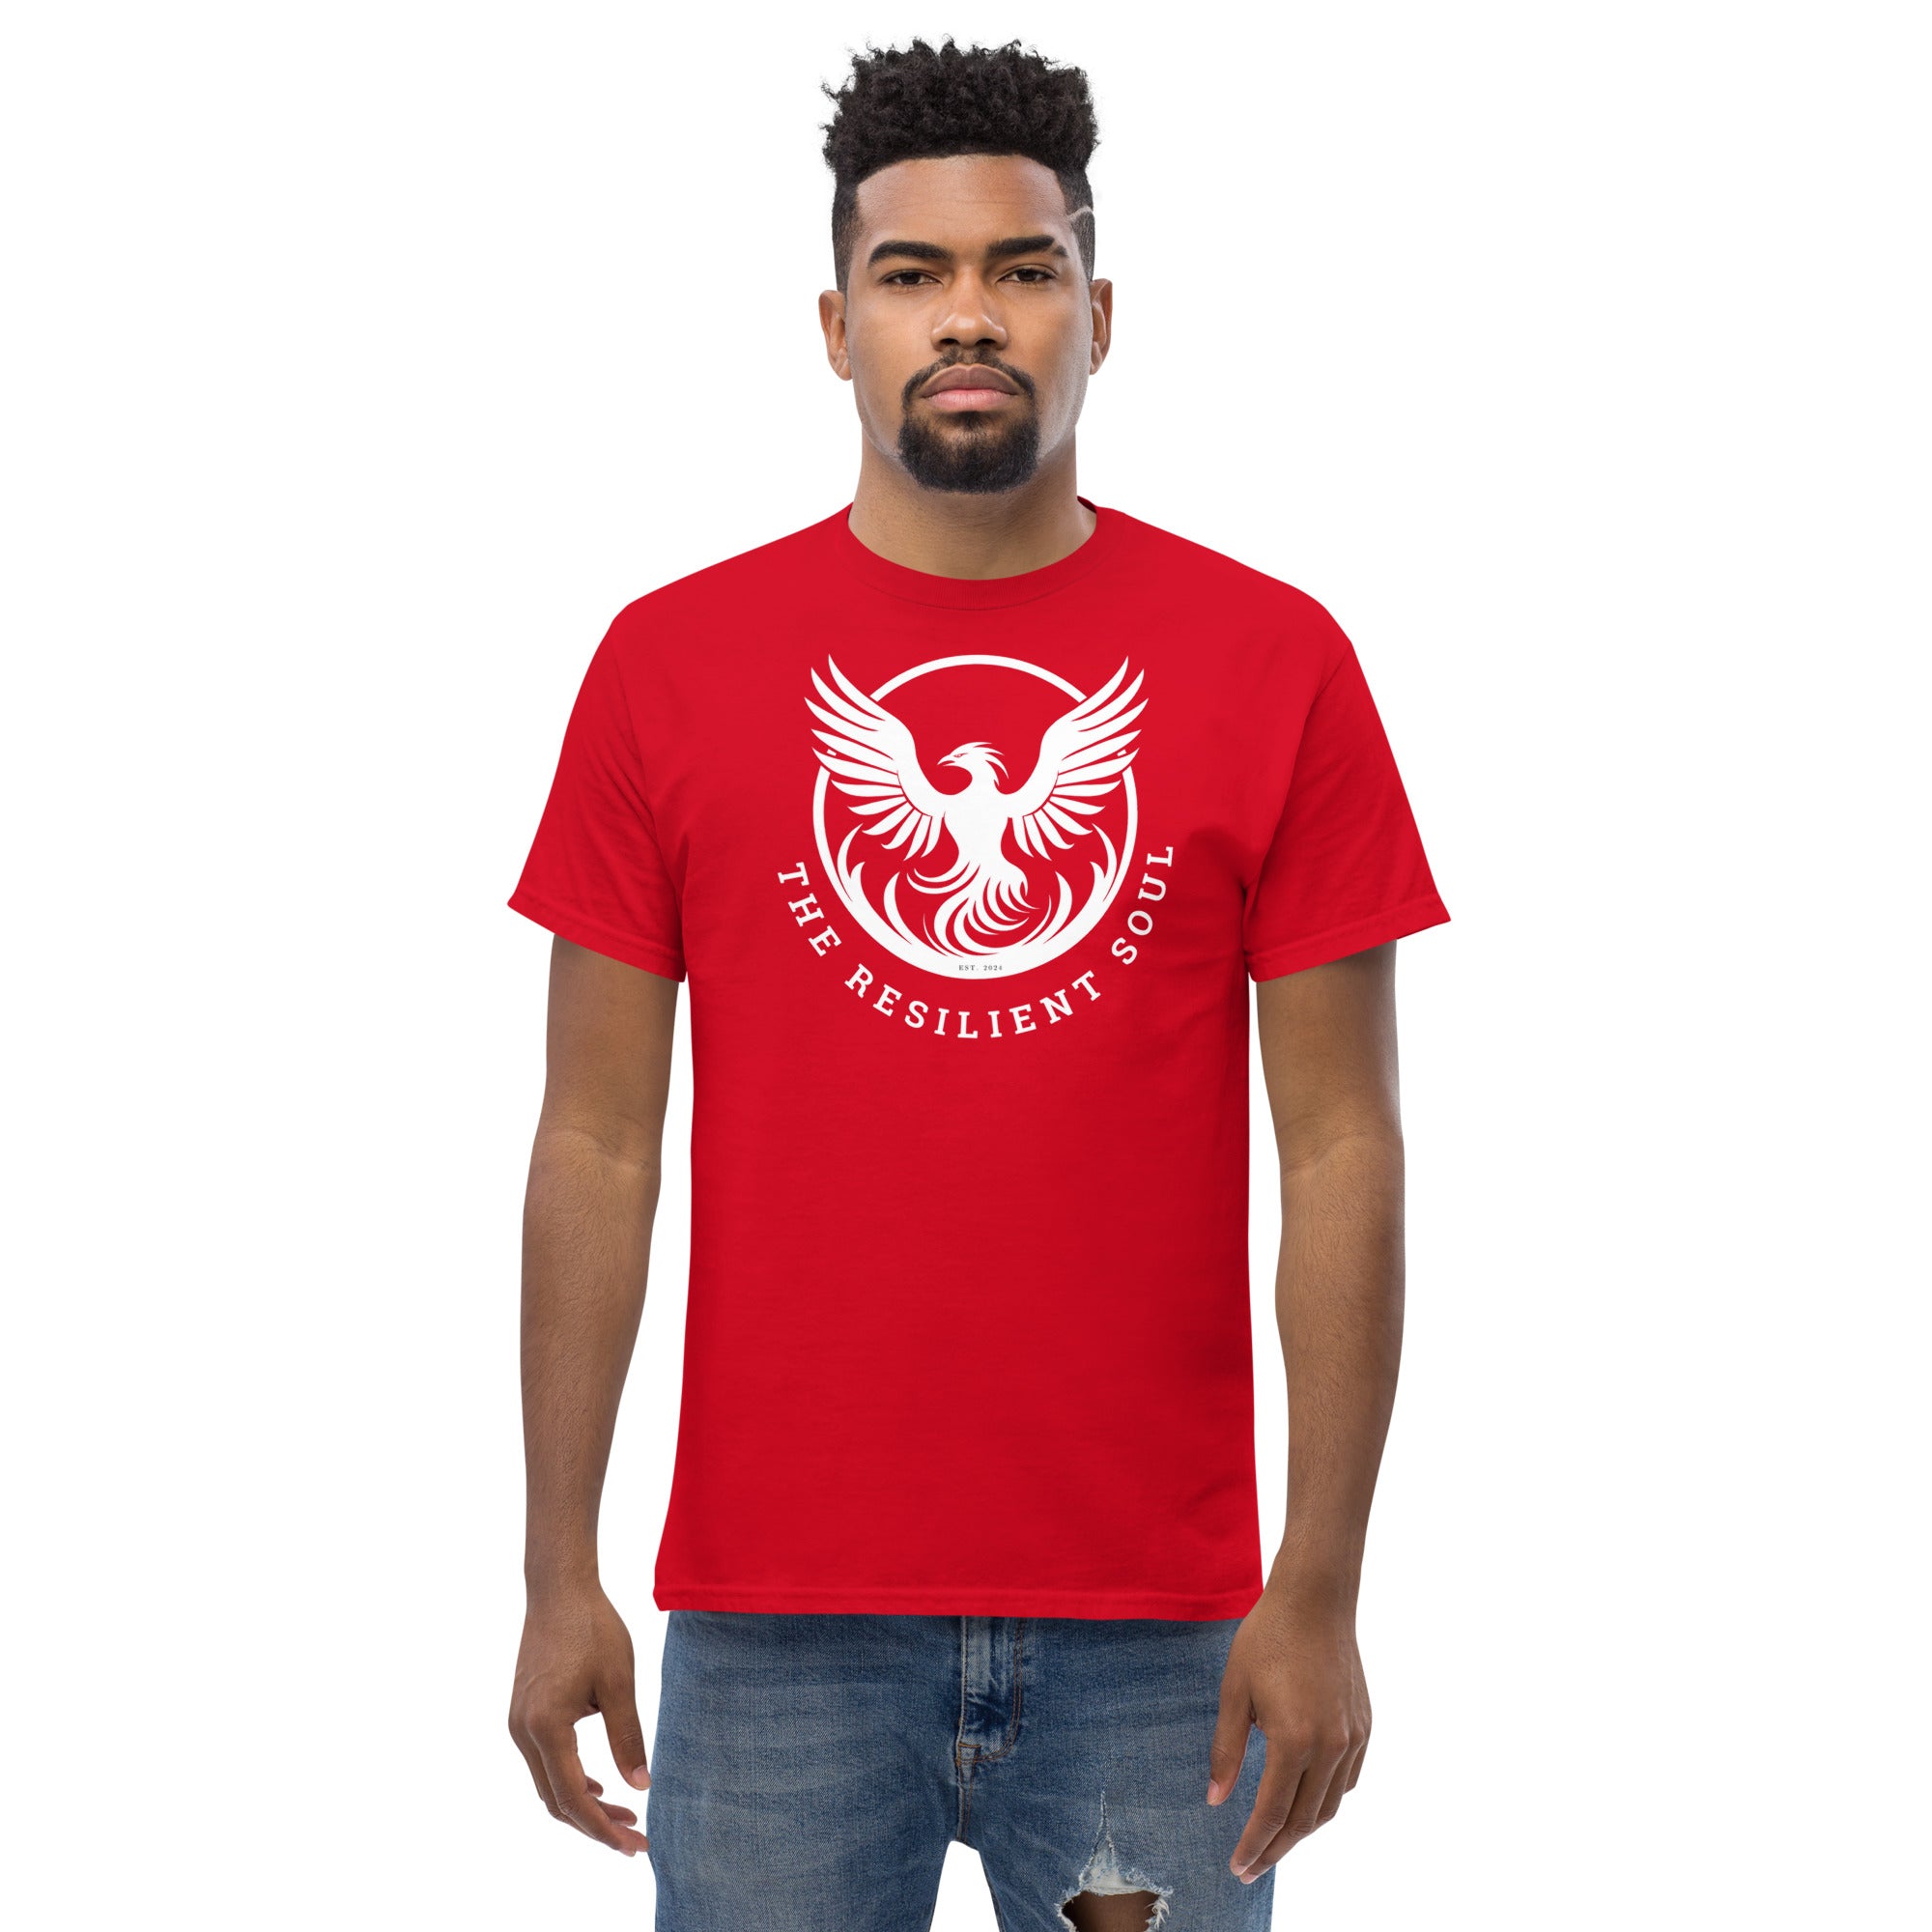 The Resilient Soul Men's classic tee - My Store